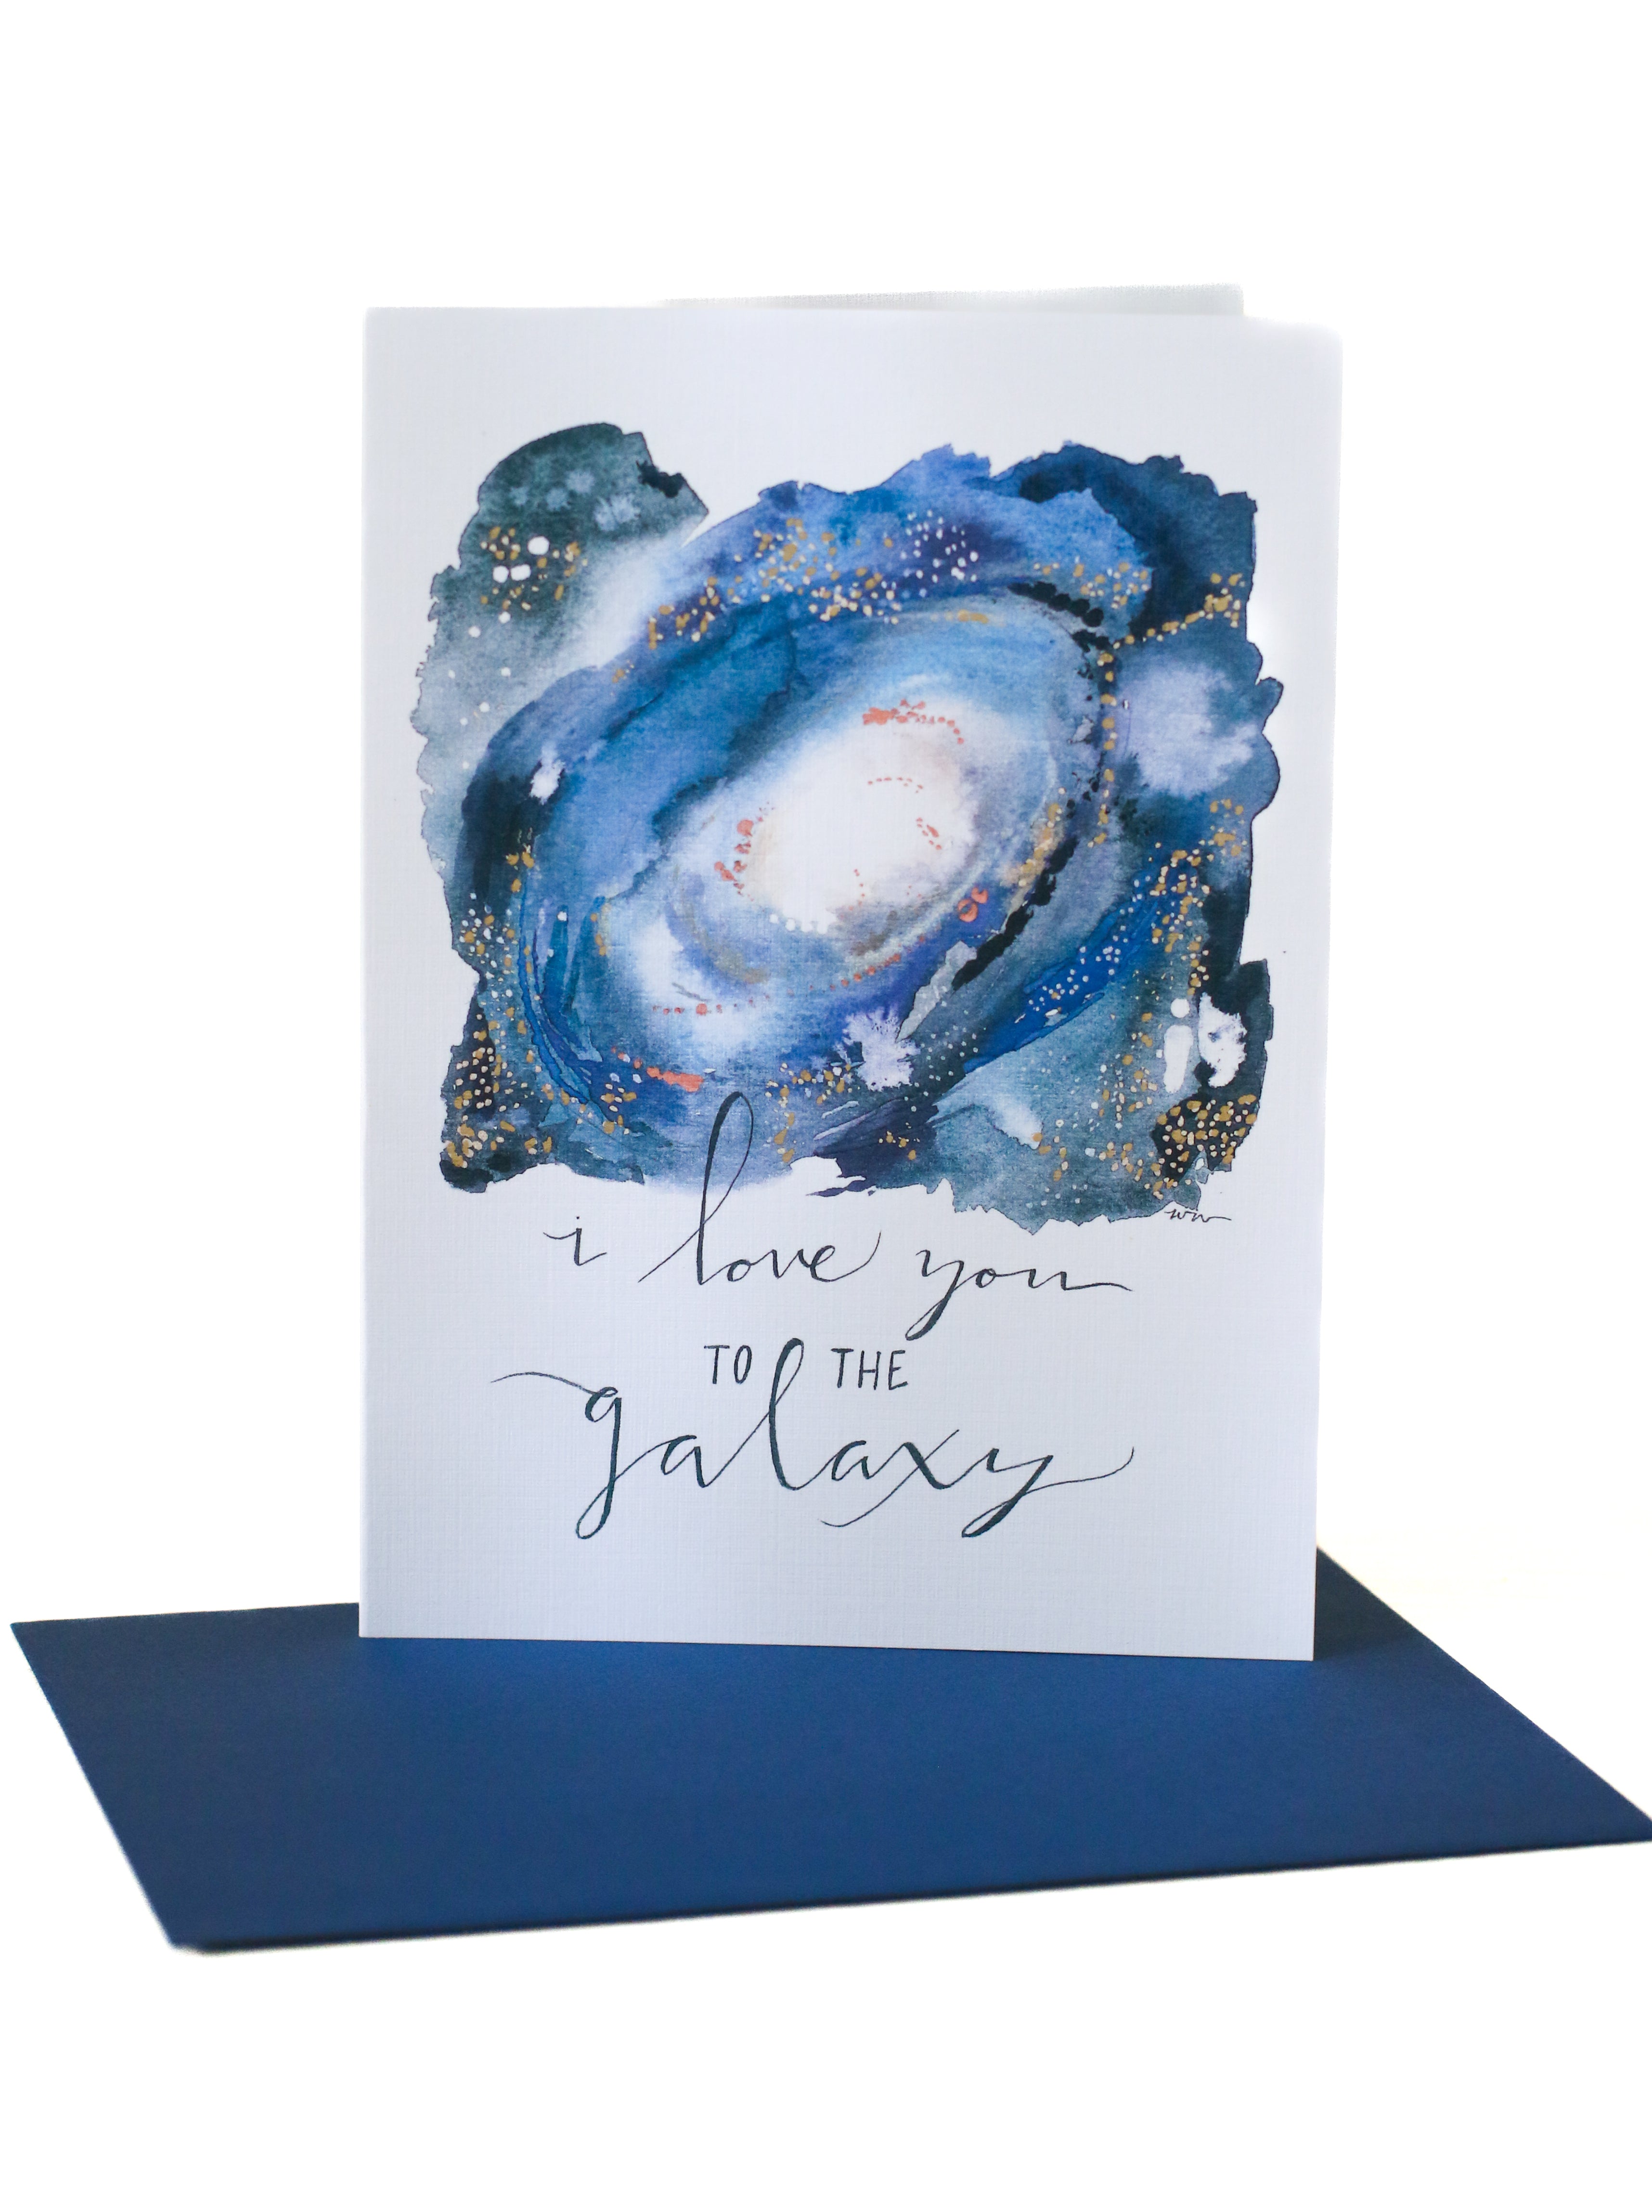 5x7 "I Love You to the Galaxy" Greeting Card